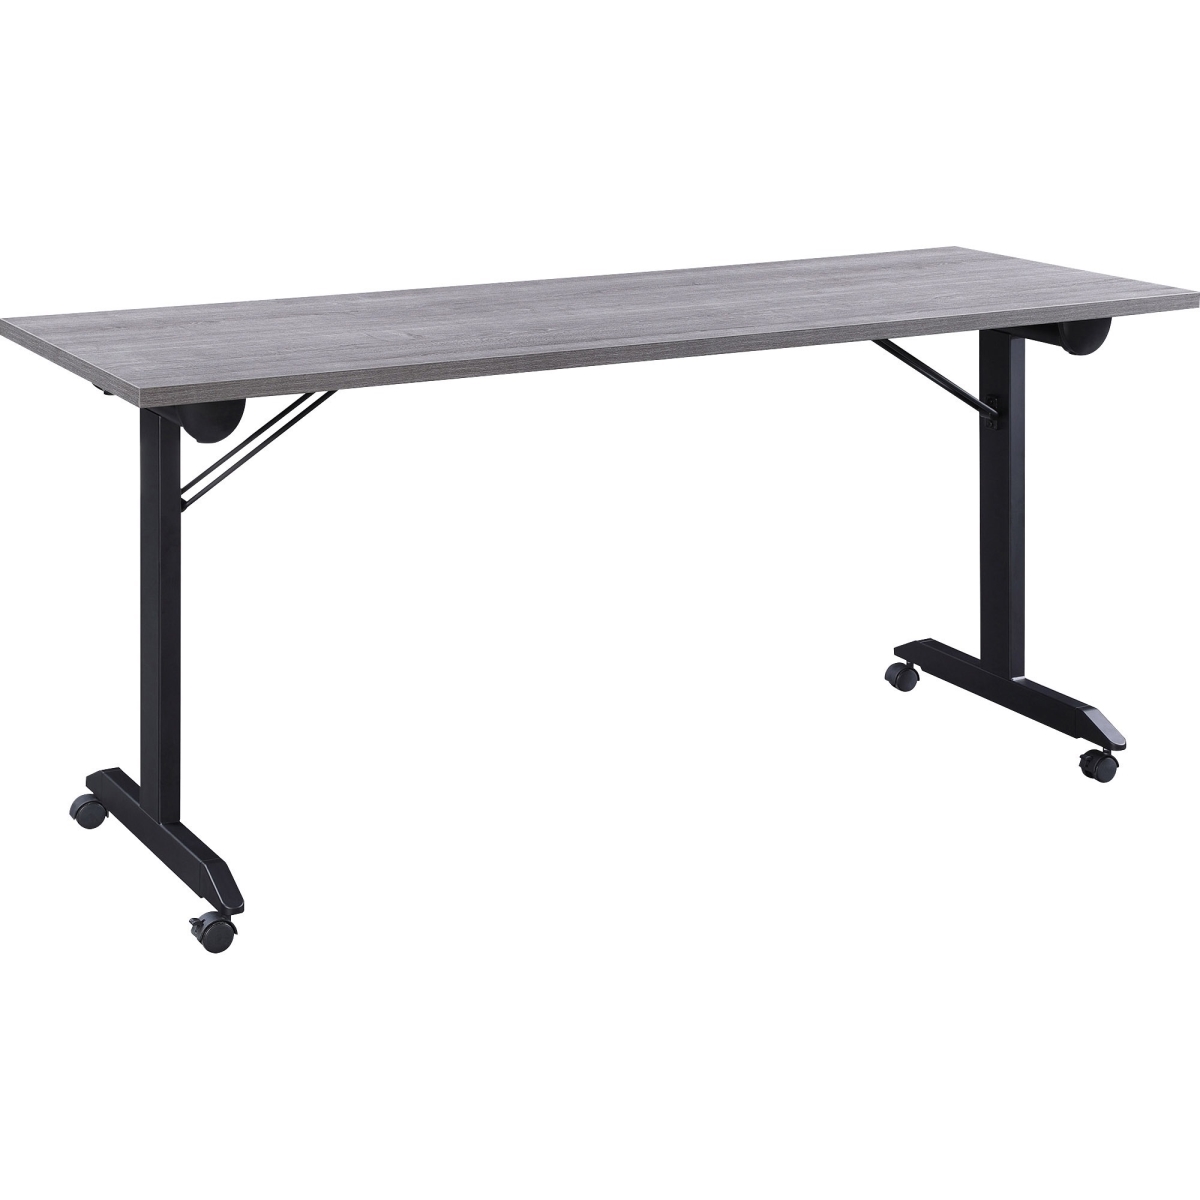 Picture of Lorell LLR60736 63 x 23 in. Mobile Folding Training Table - Weathered Charcoal